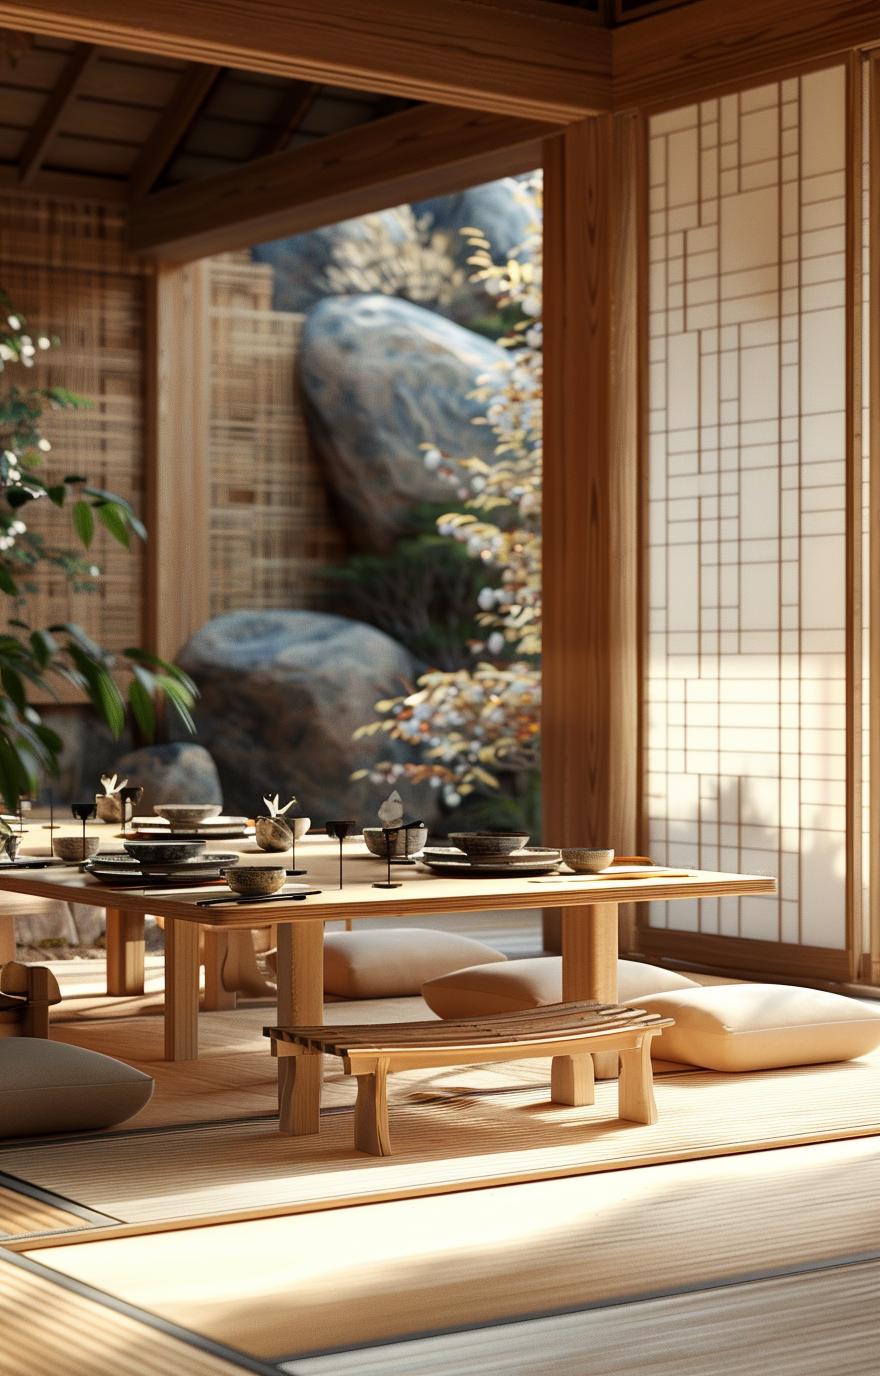 Outdoor Japanese dining room area illuminated by traditional Japanese lanterns